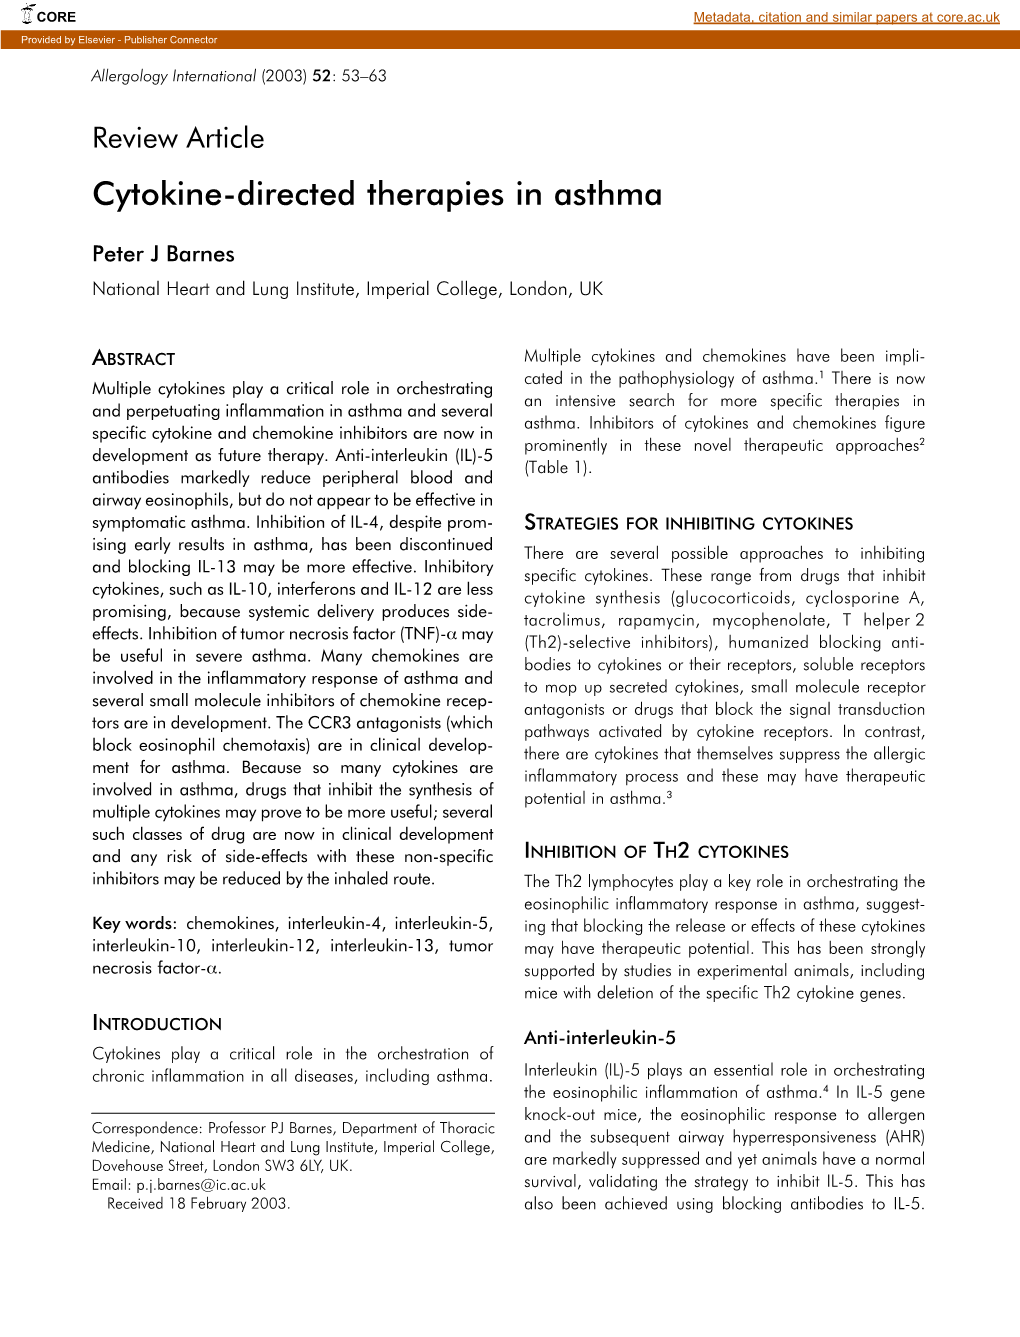 Cytokine-Directed Therapies in Asthma